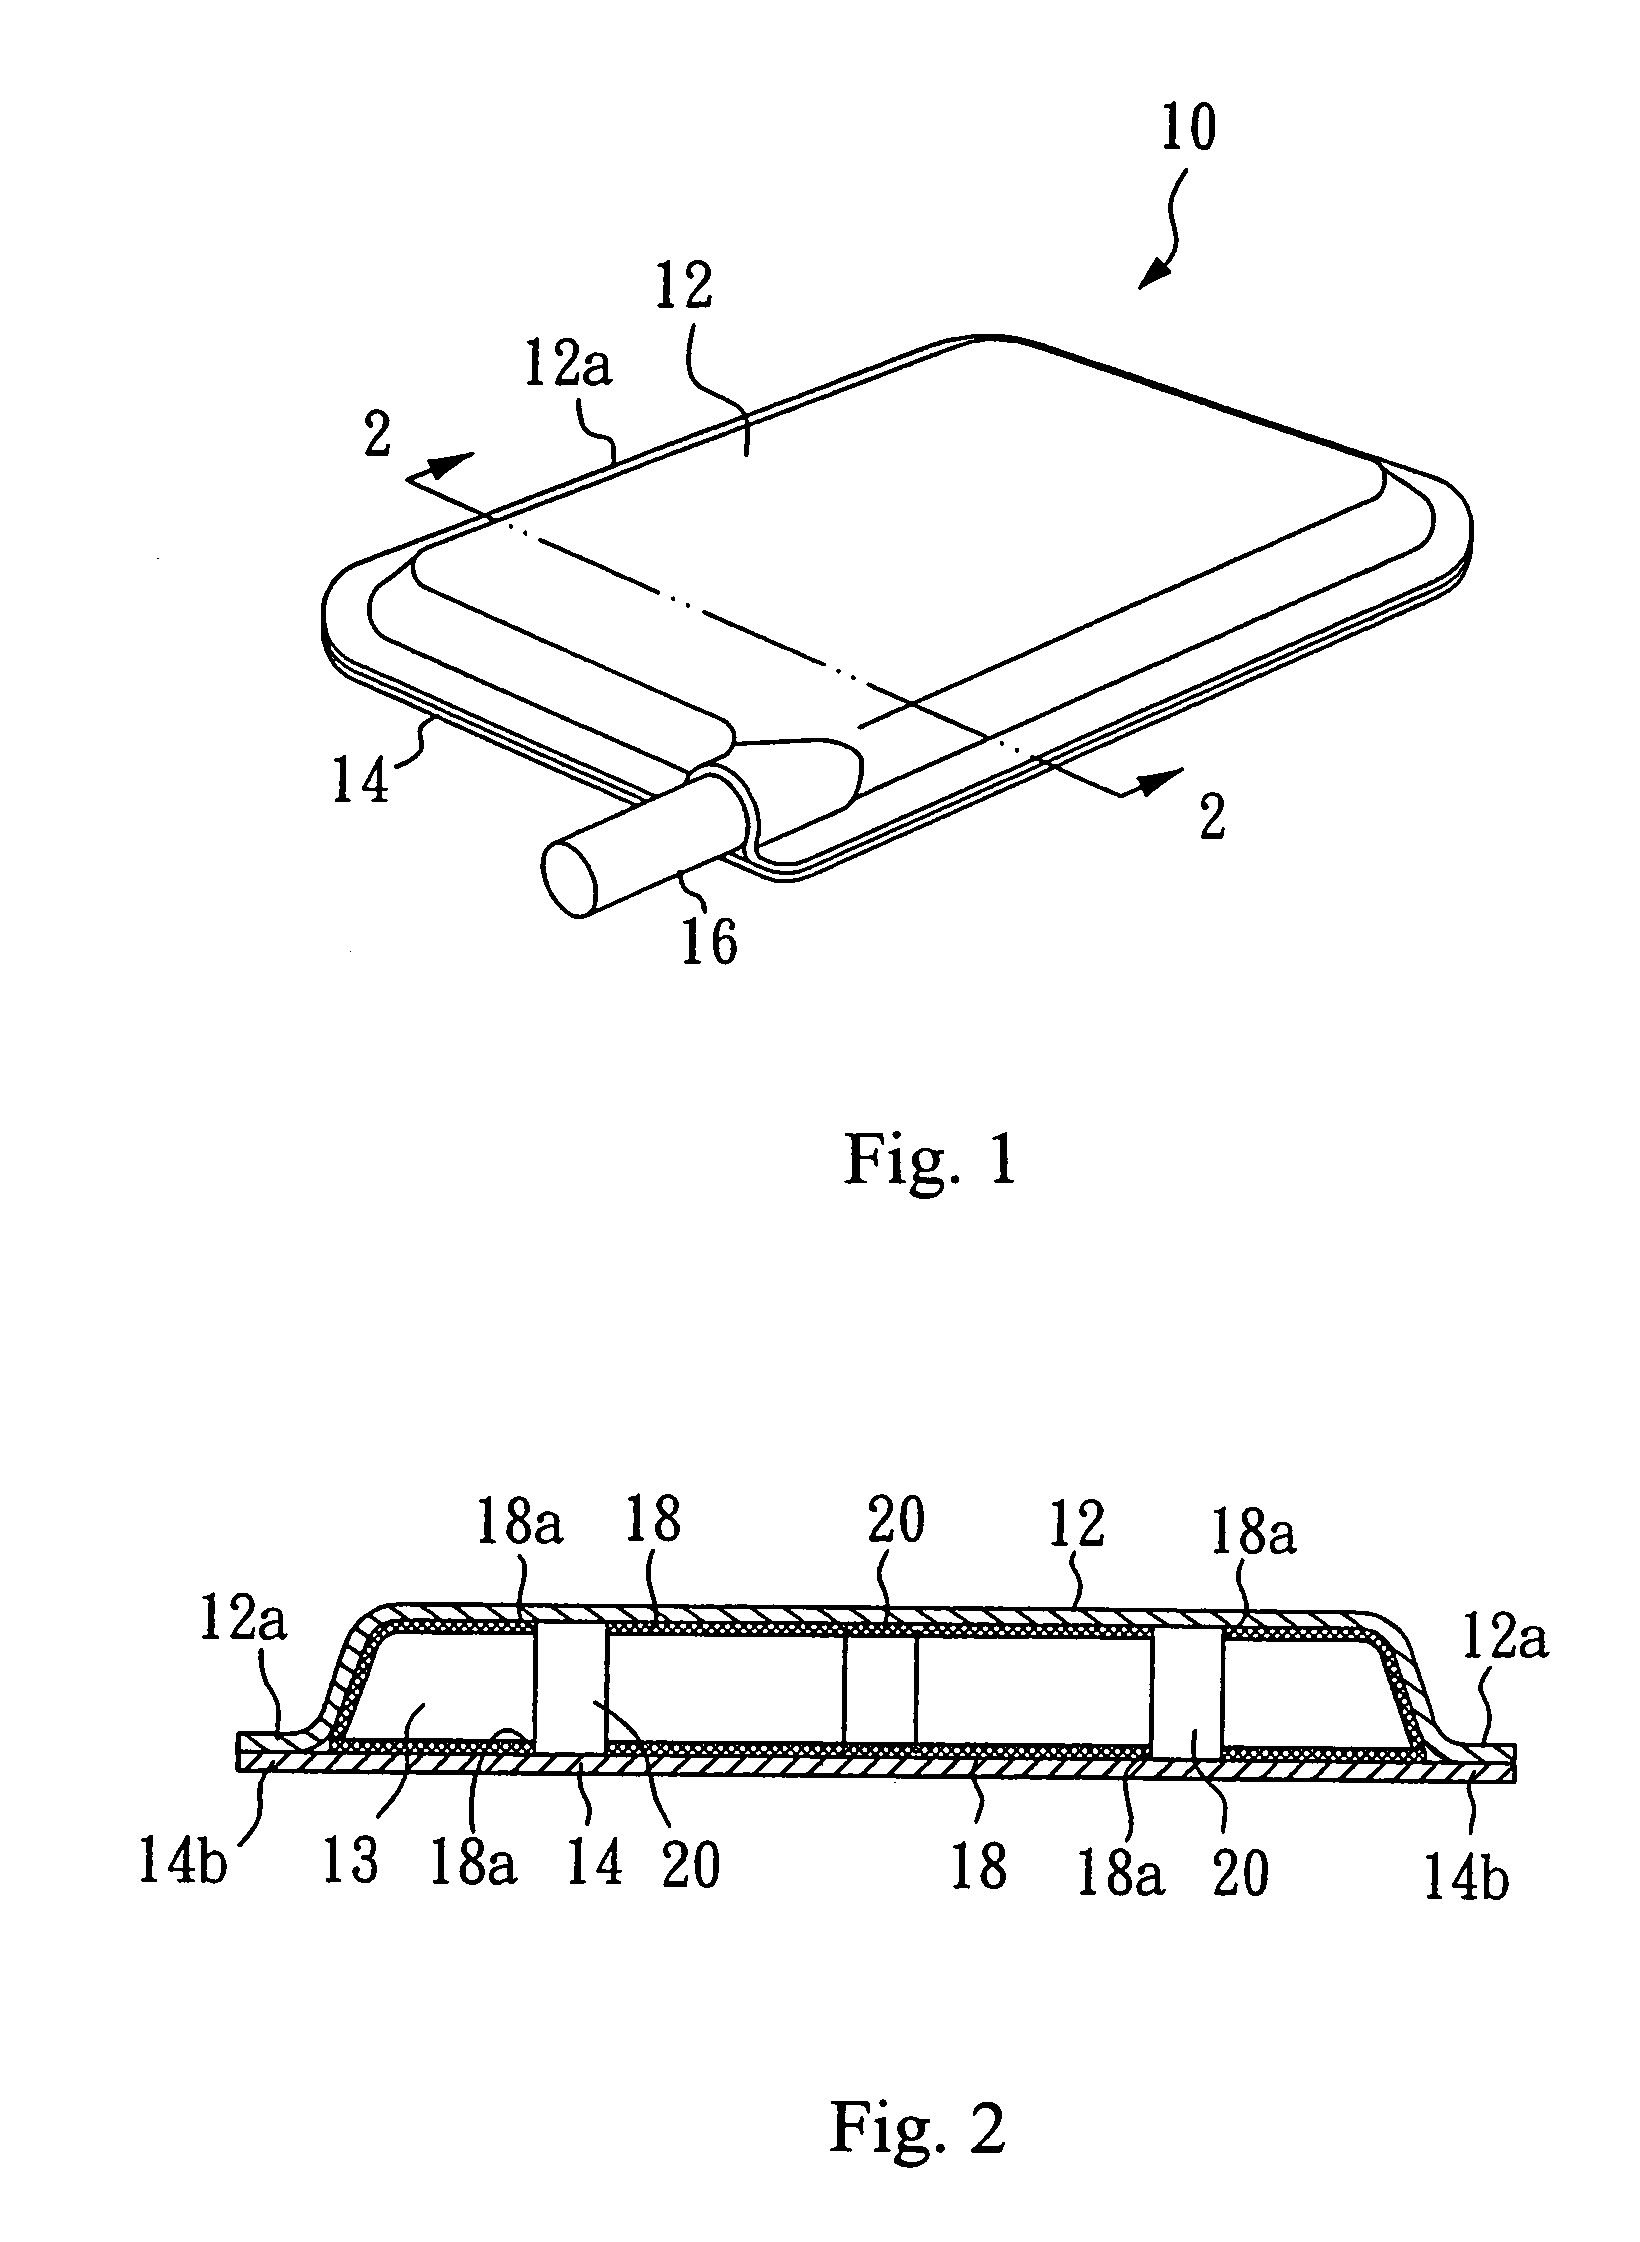 Bendable heat spreader with metallic wire mesh-based microstructure and method for fabricating same